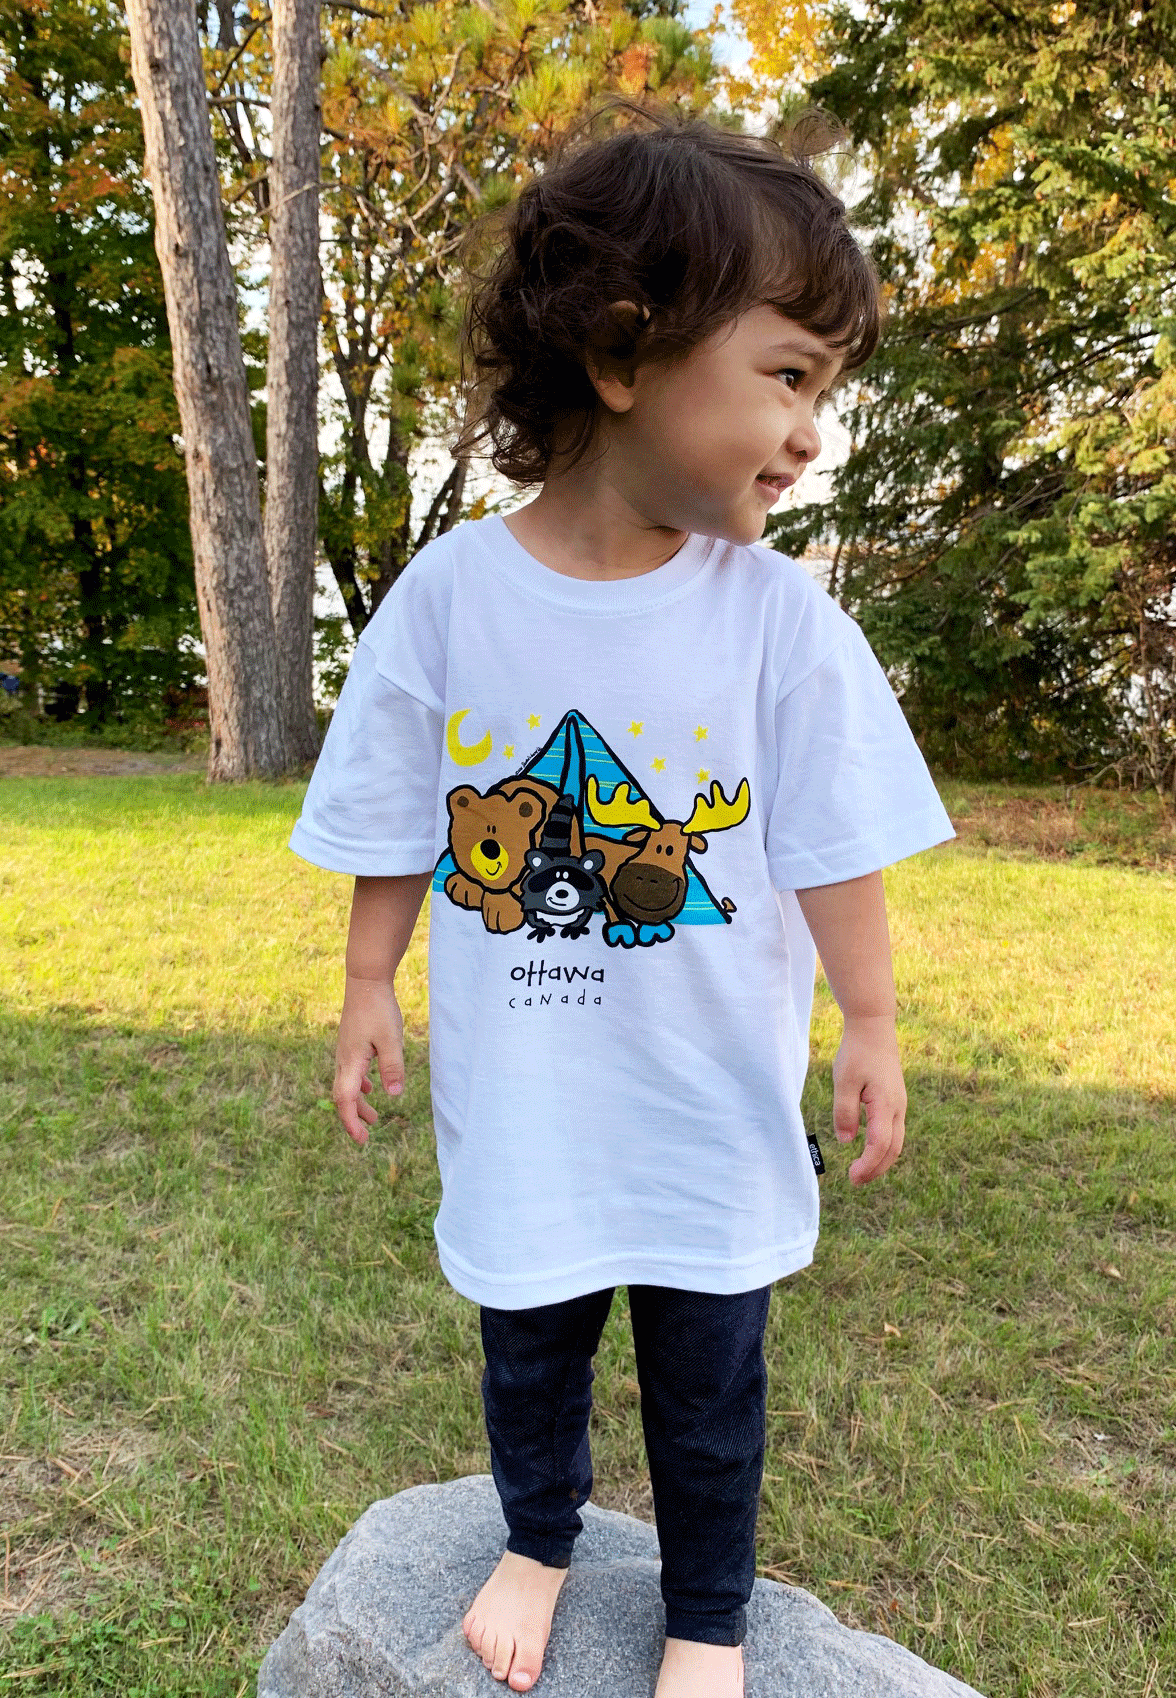  Canadian Design Toddler T-Shirt - Gifts for Kids